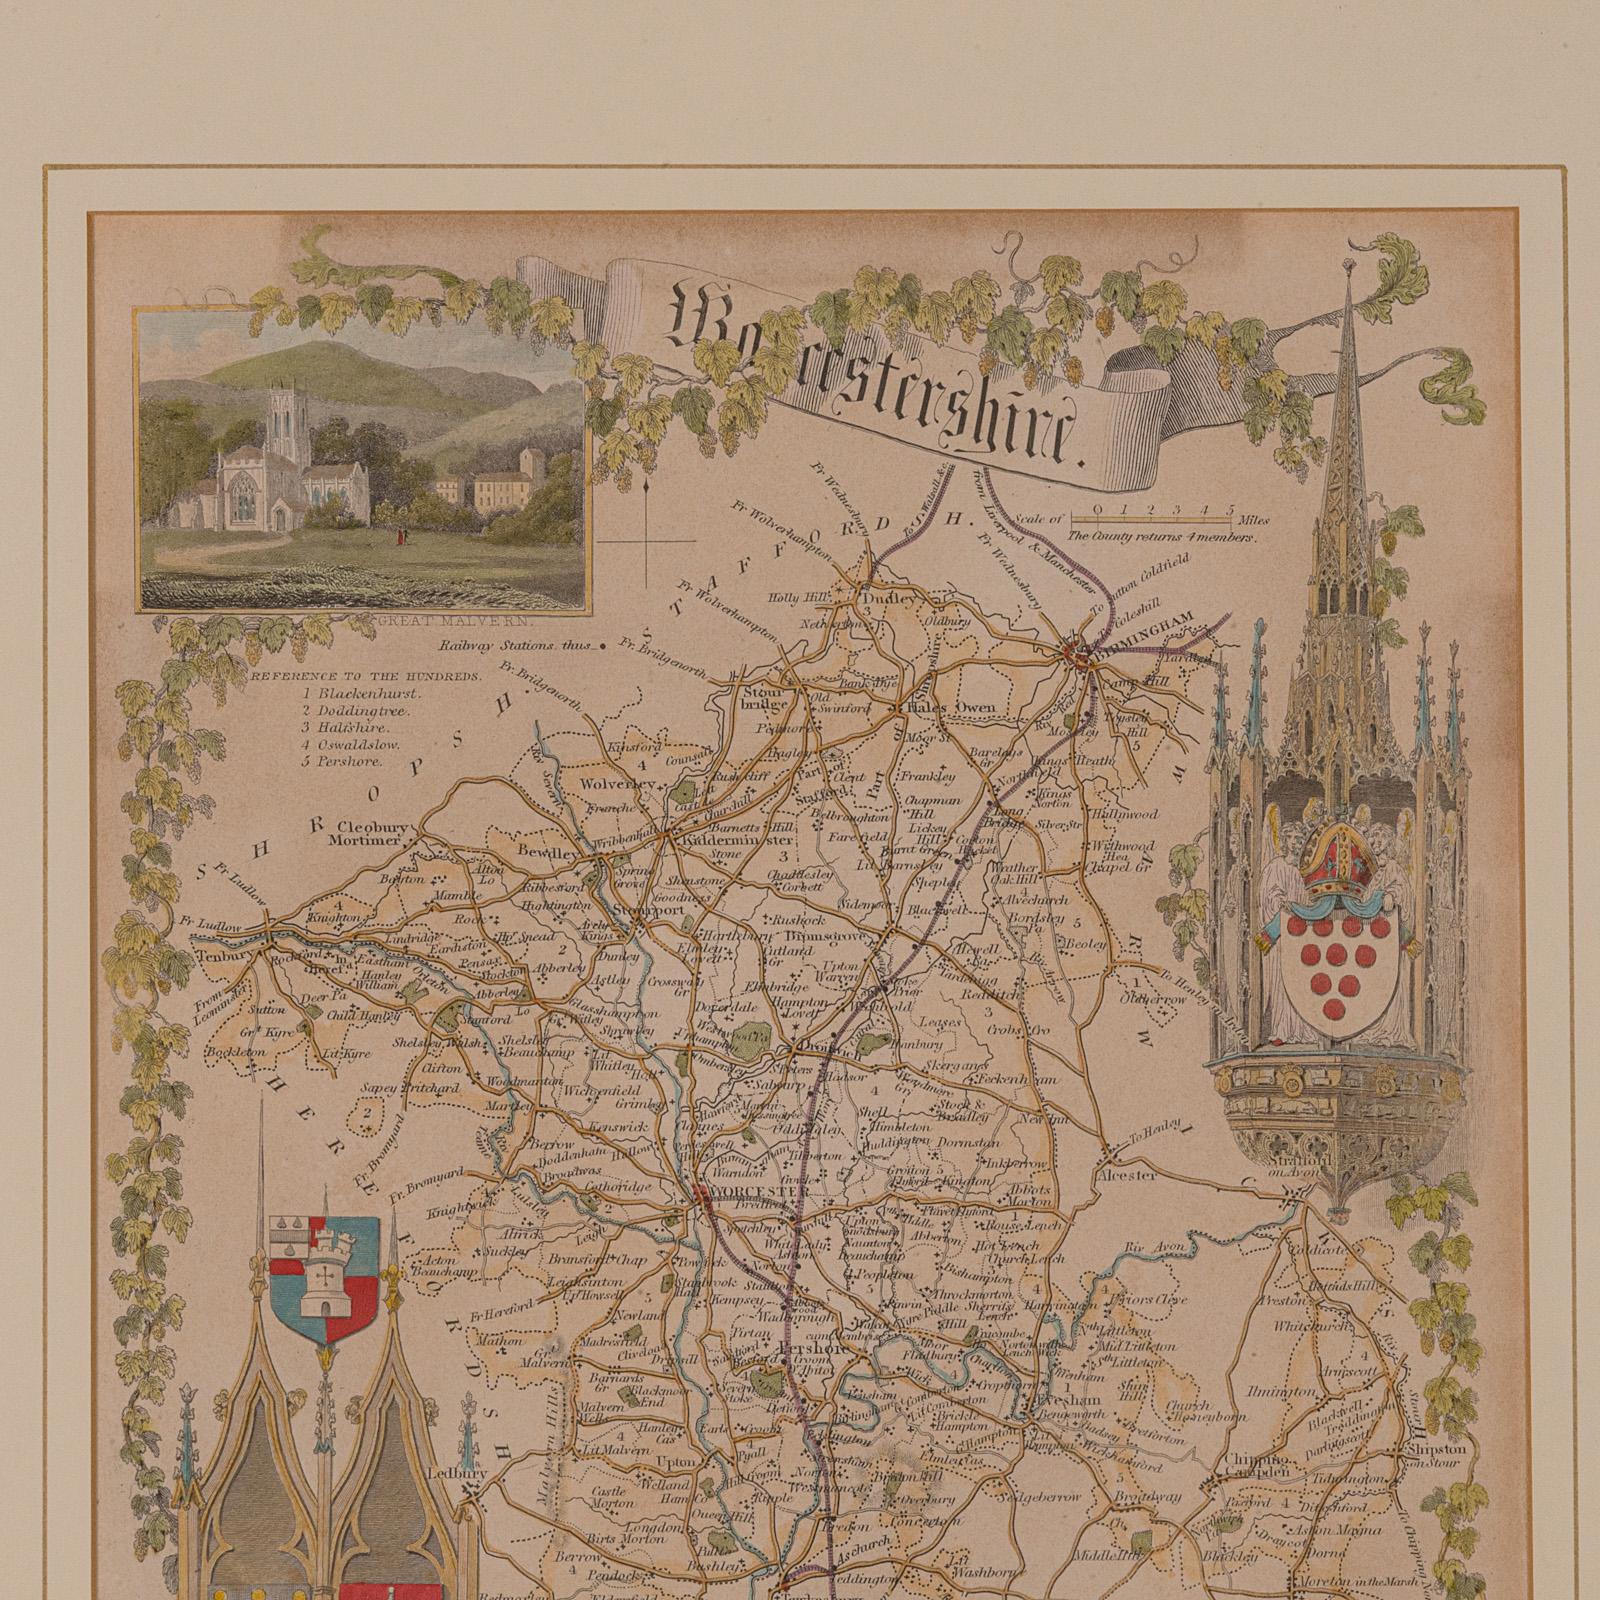 British Antique Lithography Map, Worcestershire, English, Framed Engraving, Cartography For Sale